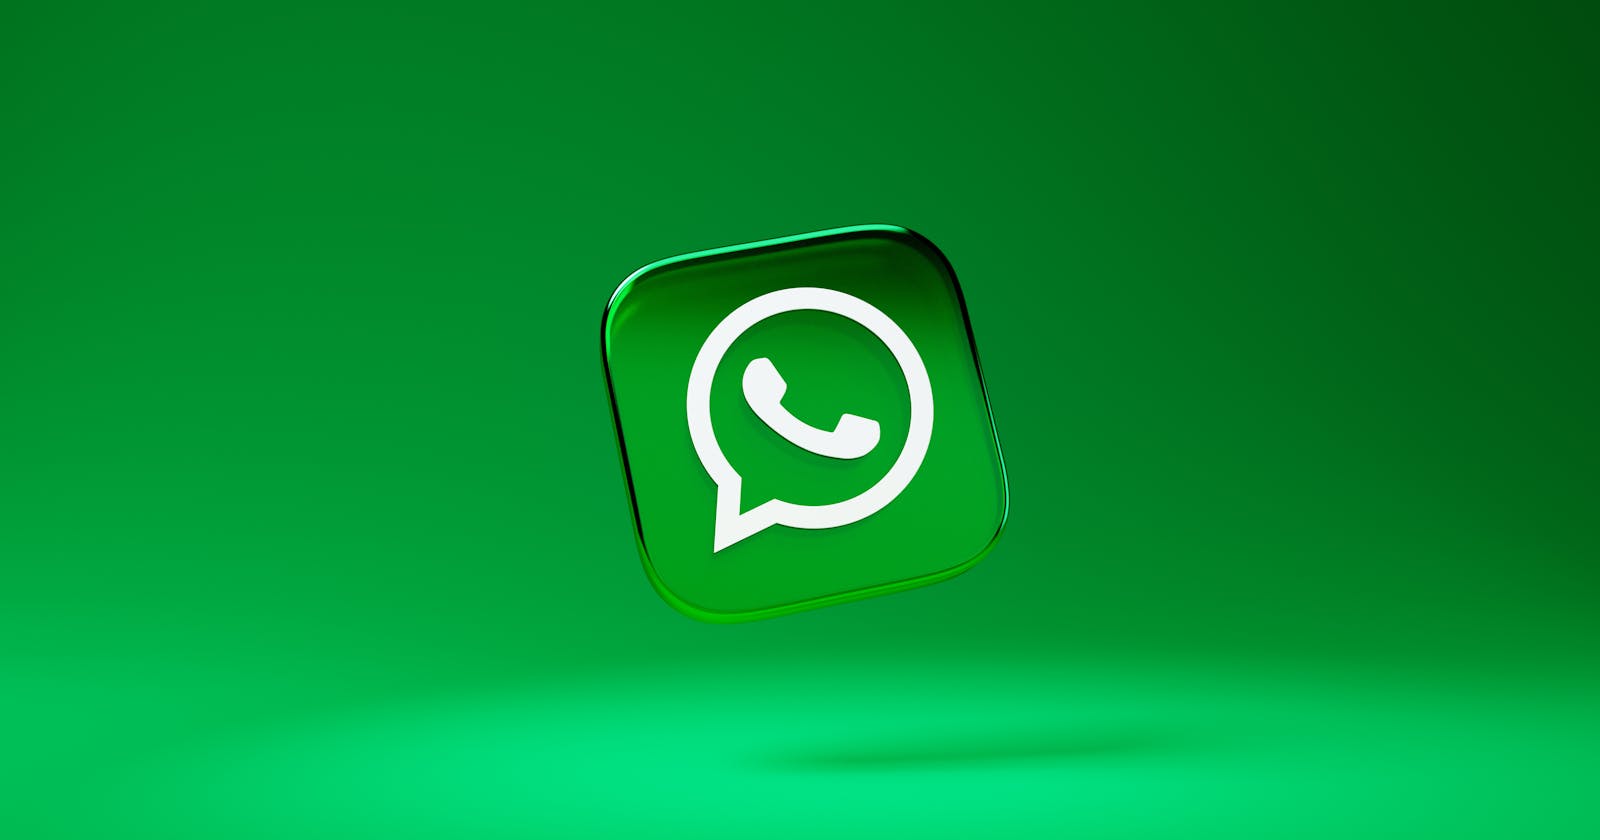 WhatsApp’s Latest Updates: A Guide to What’s New (2).